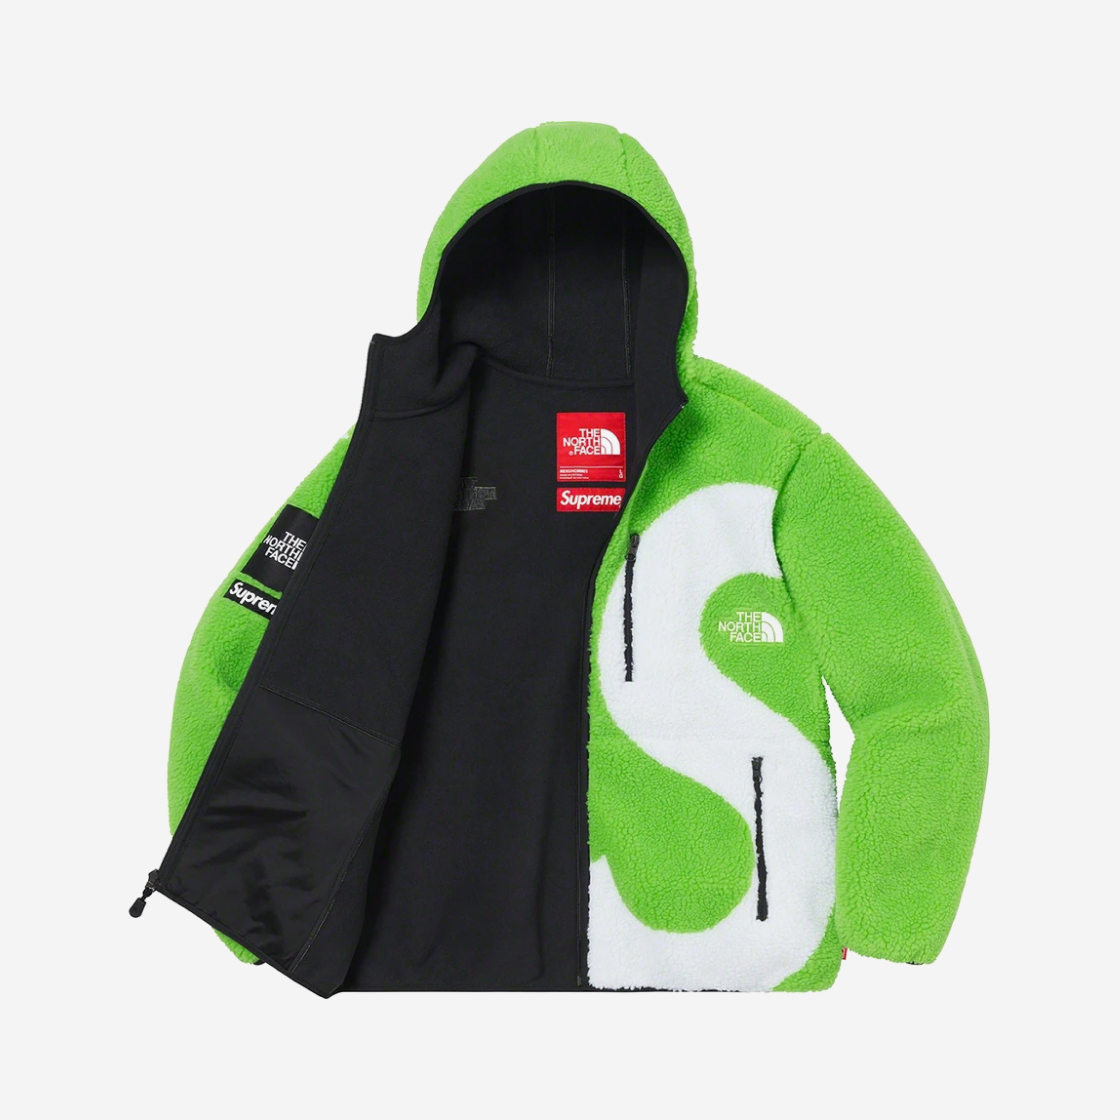 Supreme The north face Hooded Fleece